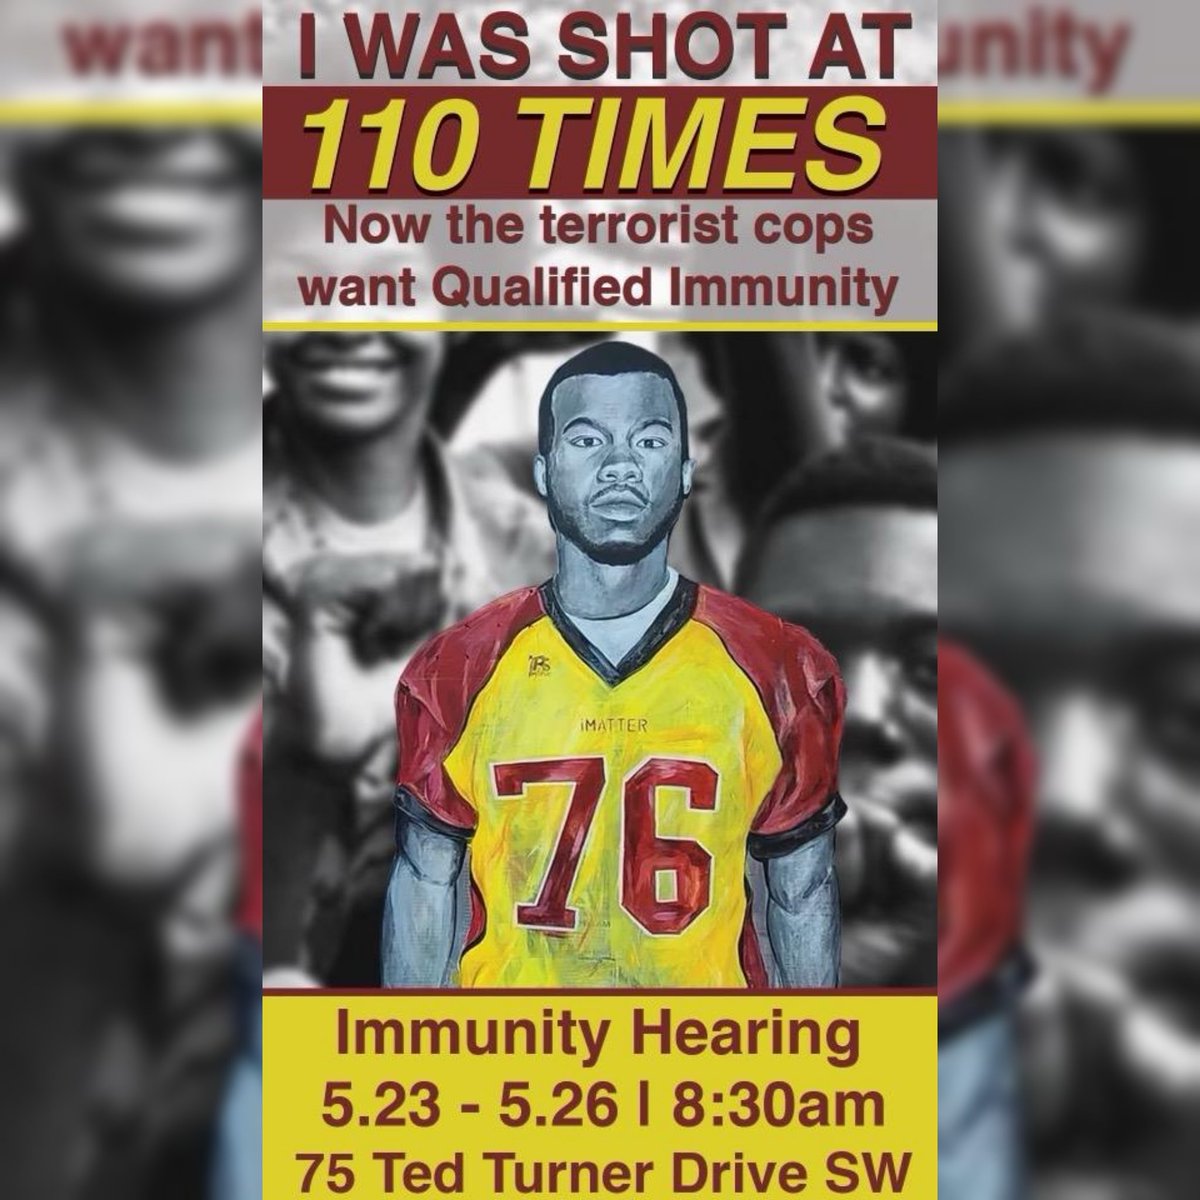 .#Atlanta needs to show up and support the family of #JamarionRobinson. #qualifiedimmunity needs to end. #KILLERCOPS #ACAB #StopCopCity